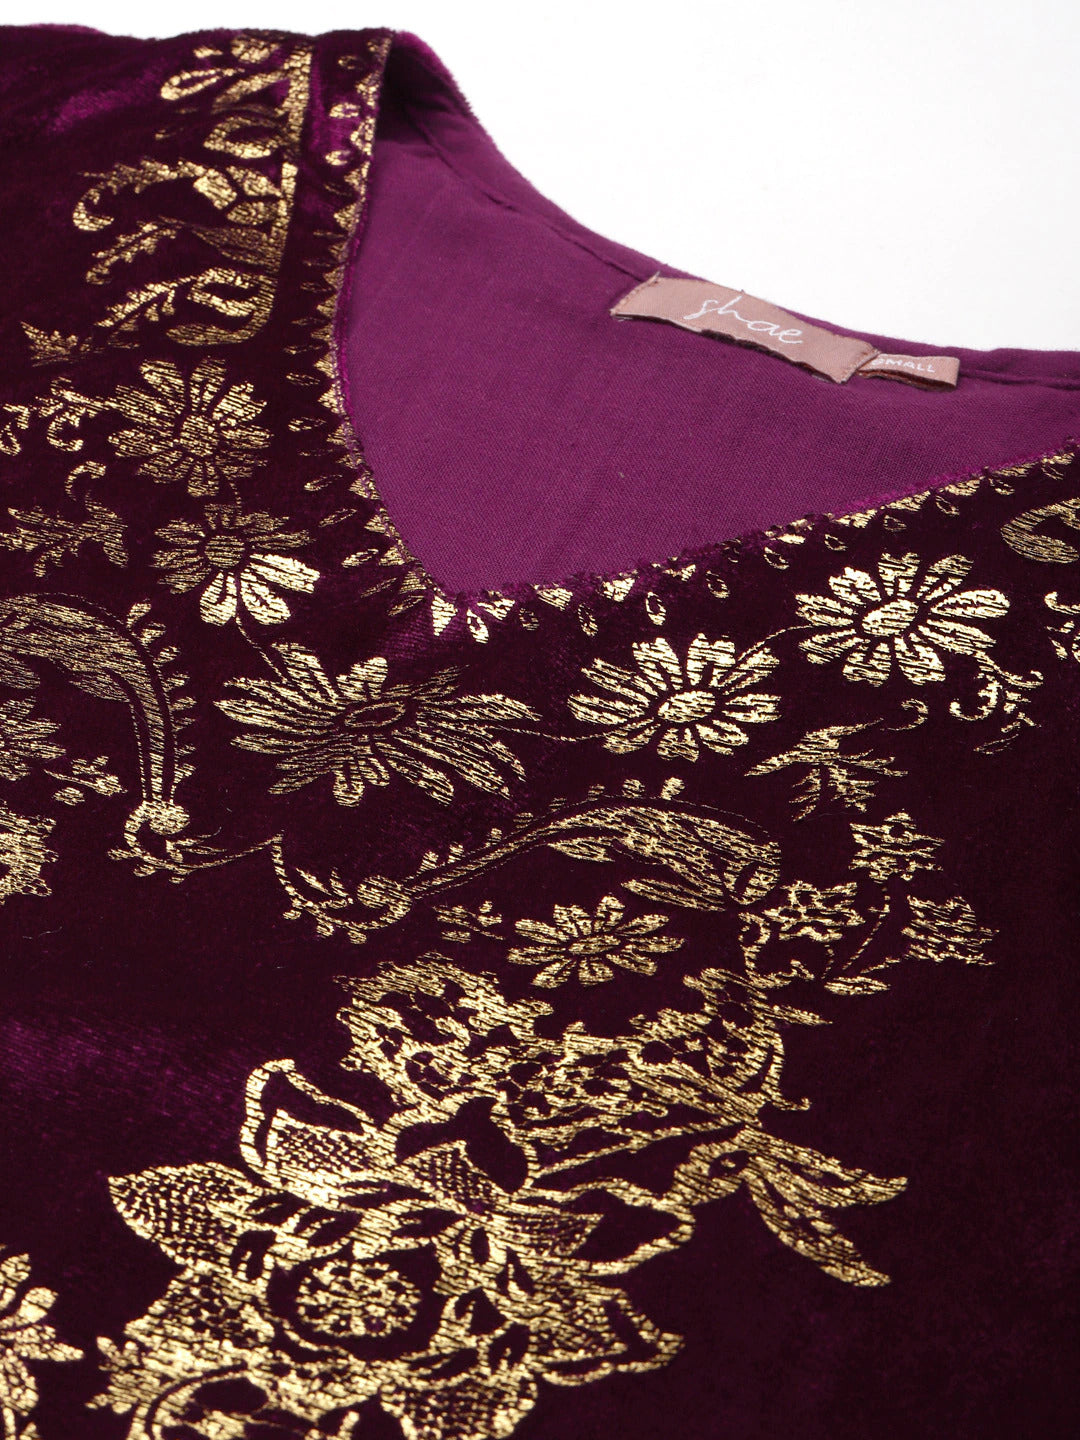 Purple & Gold Velvet Kurta - Indian Clothing in Denver, CO, Aurora, CO, Boulder, CO, Fort Collins, CO, Colorado Springs, CO, Parker, CO, Highlands Ranch, CO, Cherry Creek, CO, Centennial, CO, and Longmont, CO. Nationwide shipping USA - India Fashion X